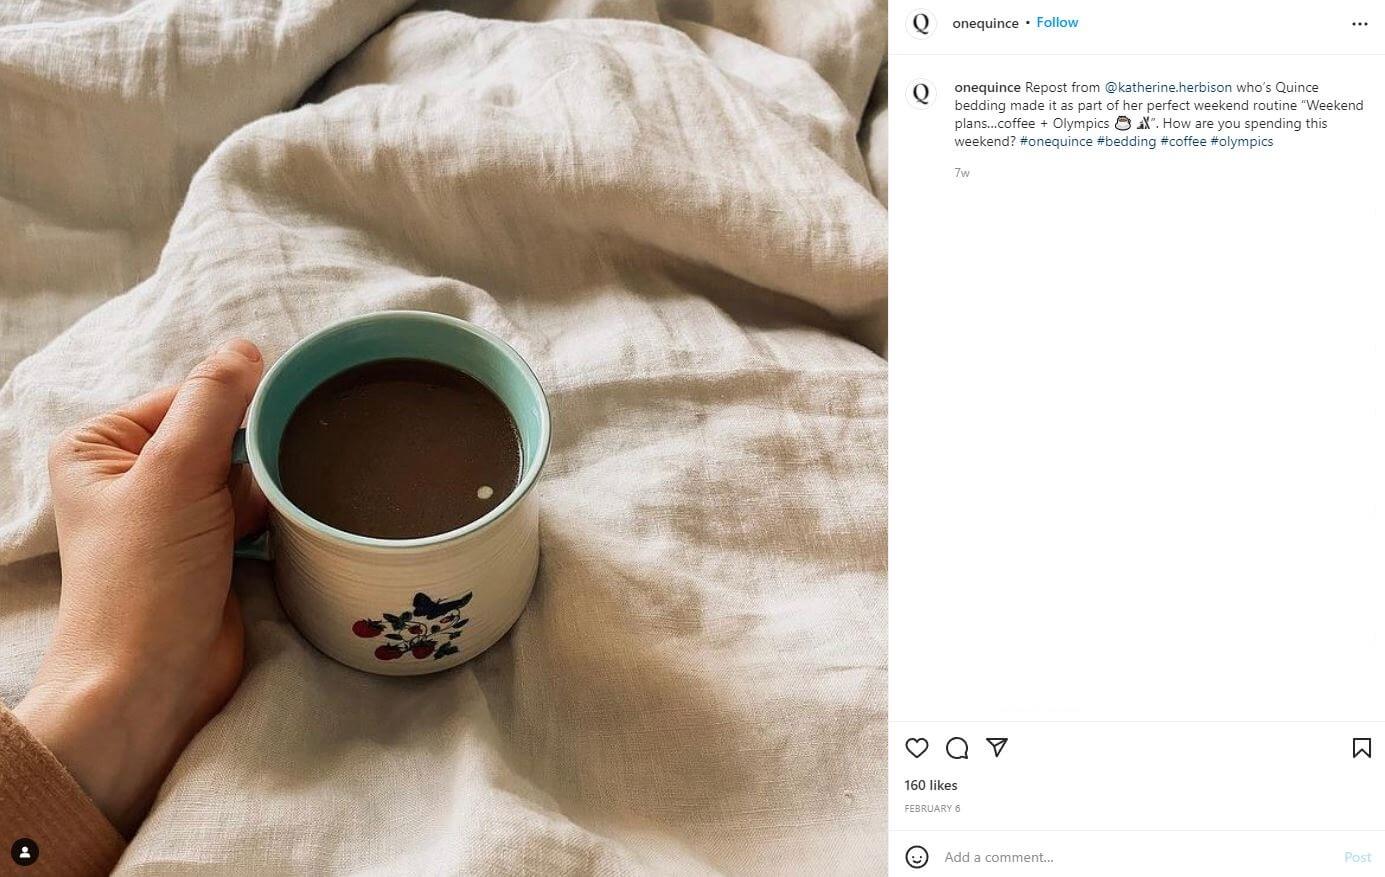 Instagram photo of a person having a cup of coffee in bed